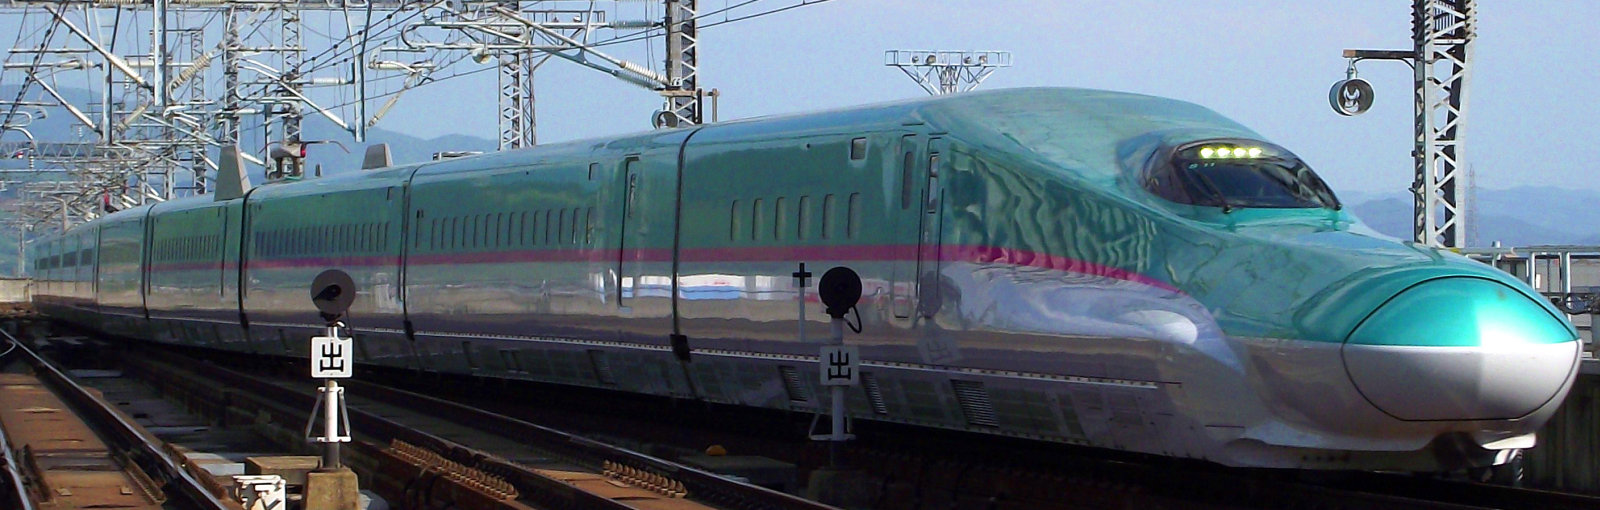 Pre-production train S11, which was later converted to the state of the series vehicles, in June 2010 in Morioka